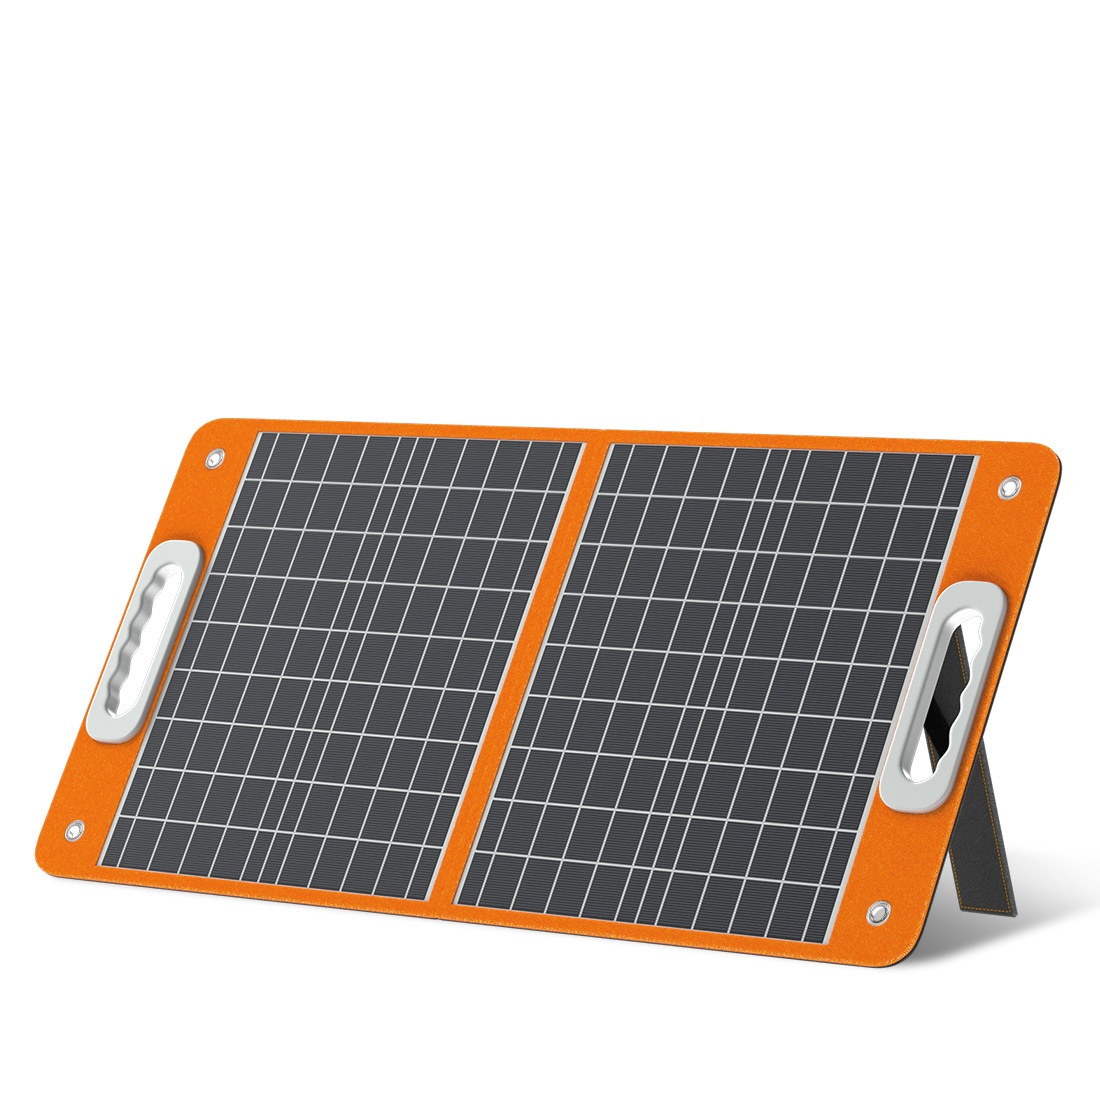 Find US Direct Flashfish 18V 60W Foldable Solar Panel Portable Solar Charger with DC Output USB C QC3 0 for Phones Tablets Camping Van RV Trip for Sale on Gipsybee.com with cryptocurrencies